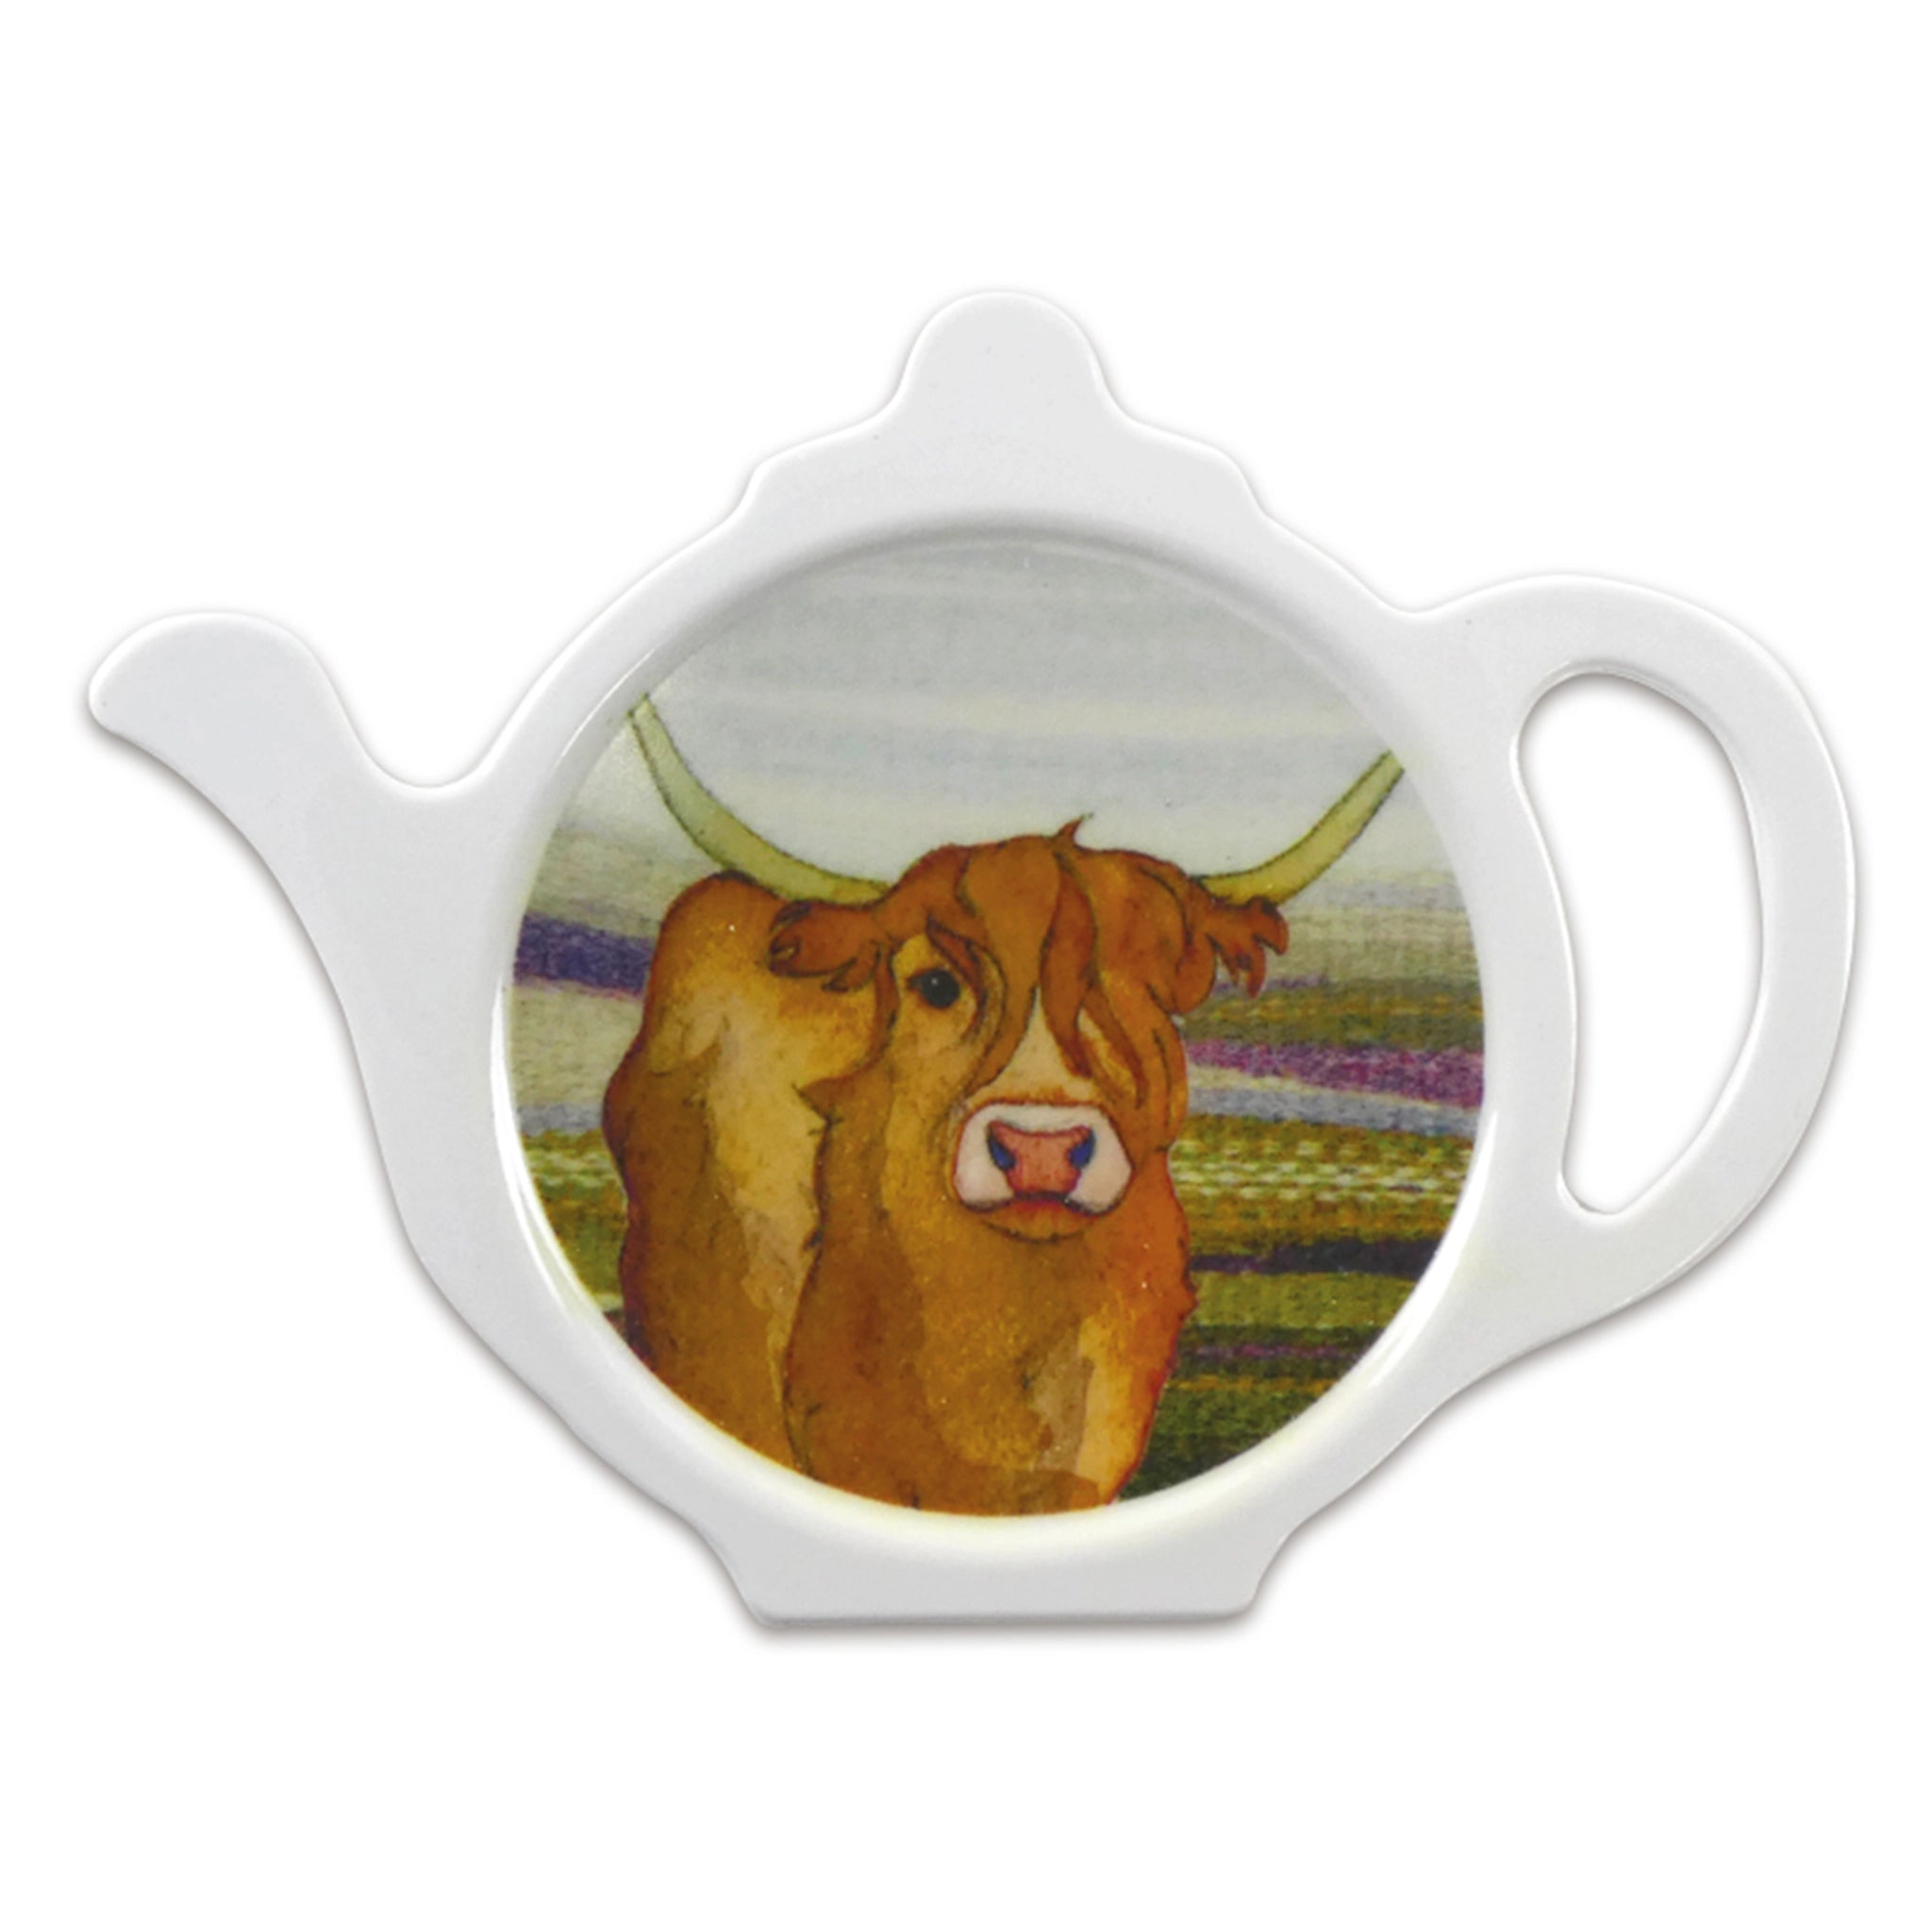 A teabag tiday in the shape of a teapot, featuring an illustration of a Highland cow on a felted landscape